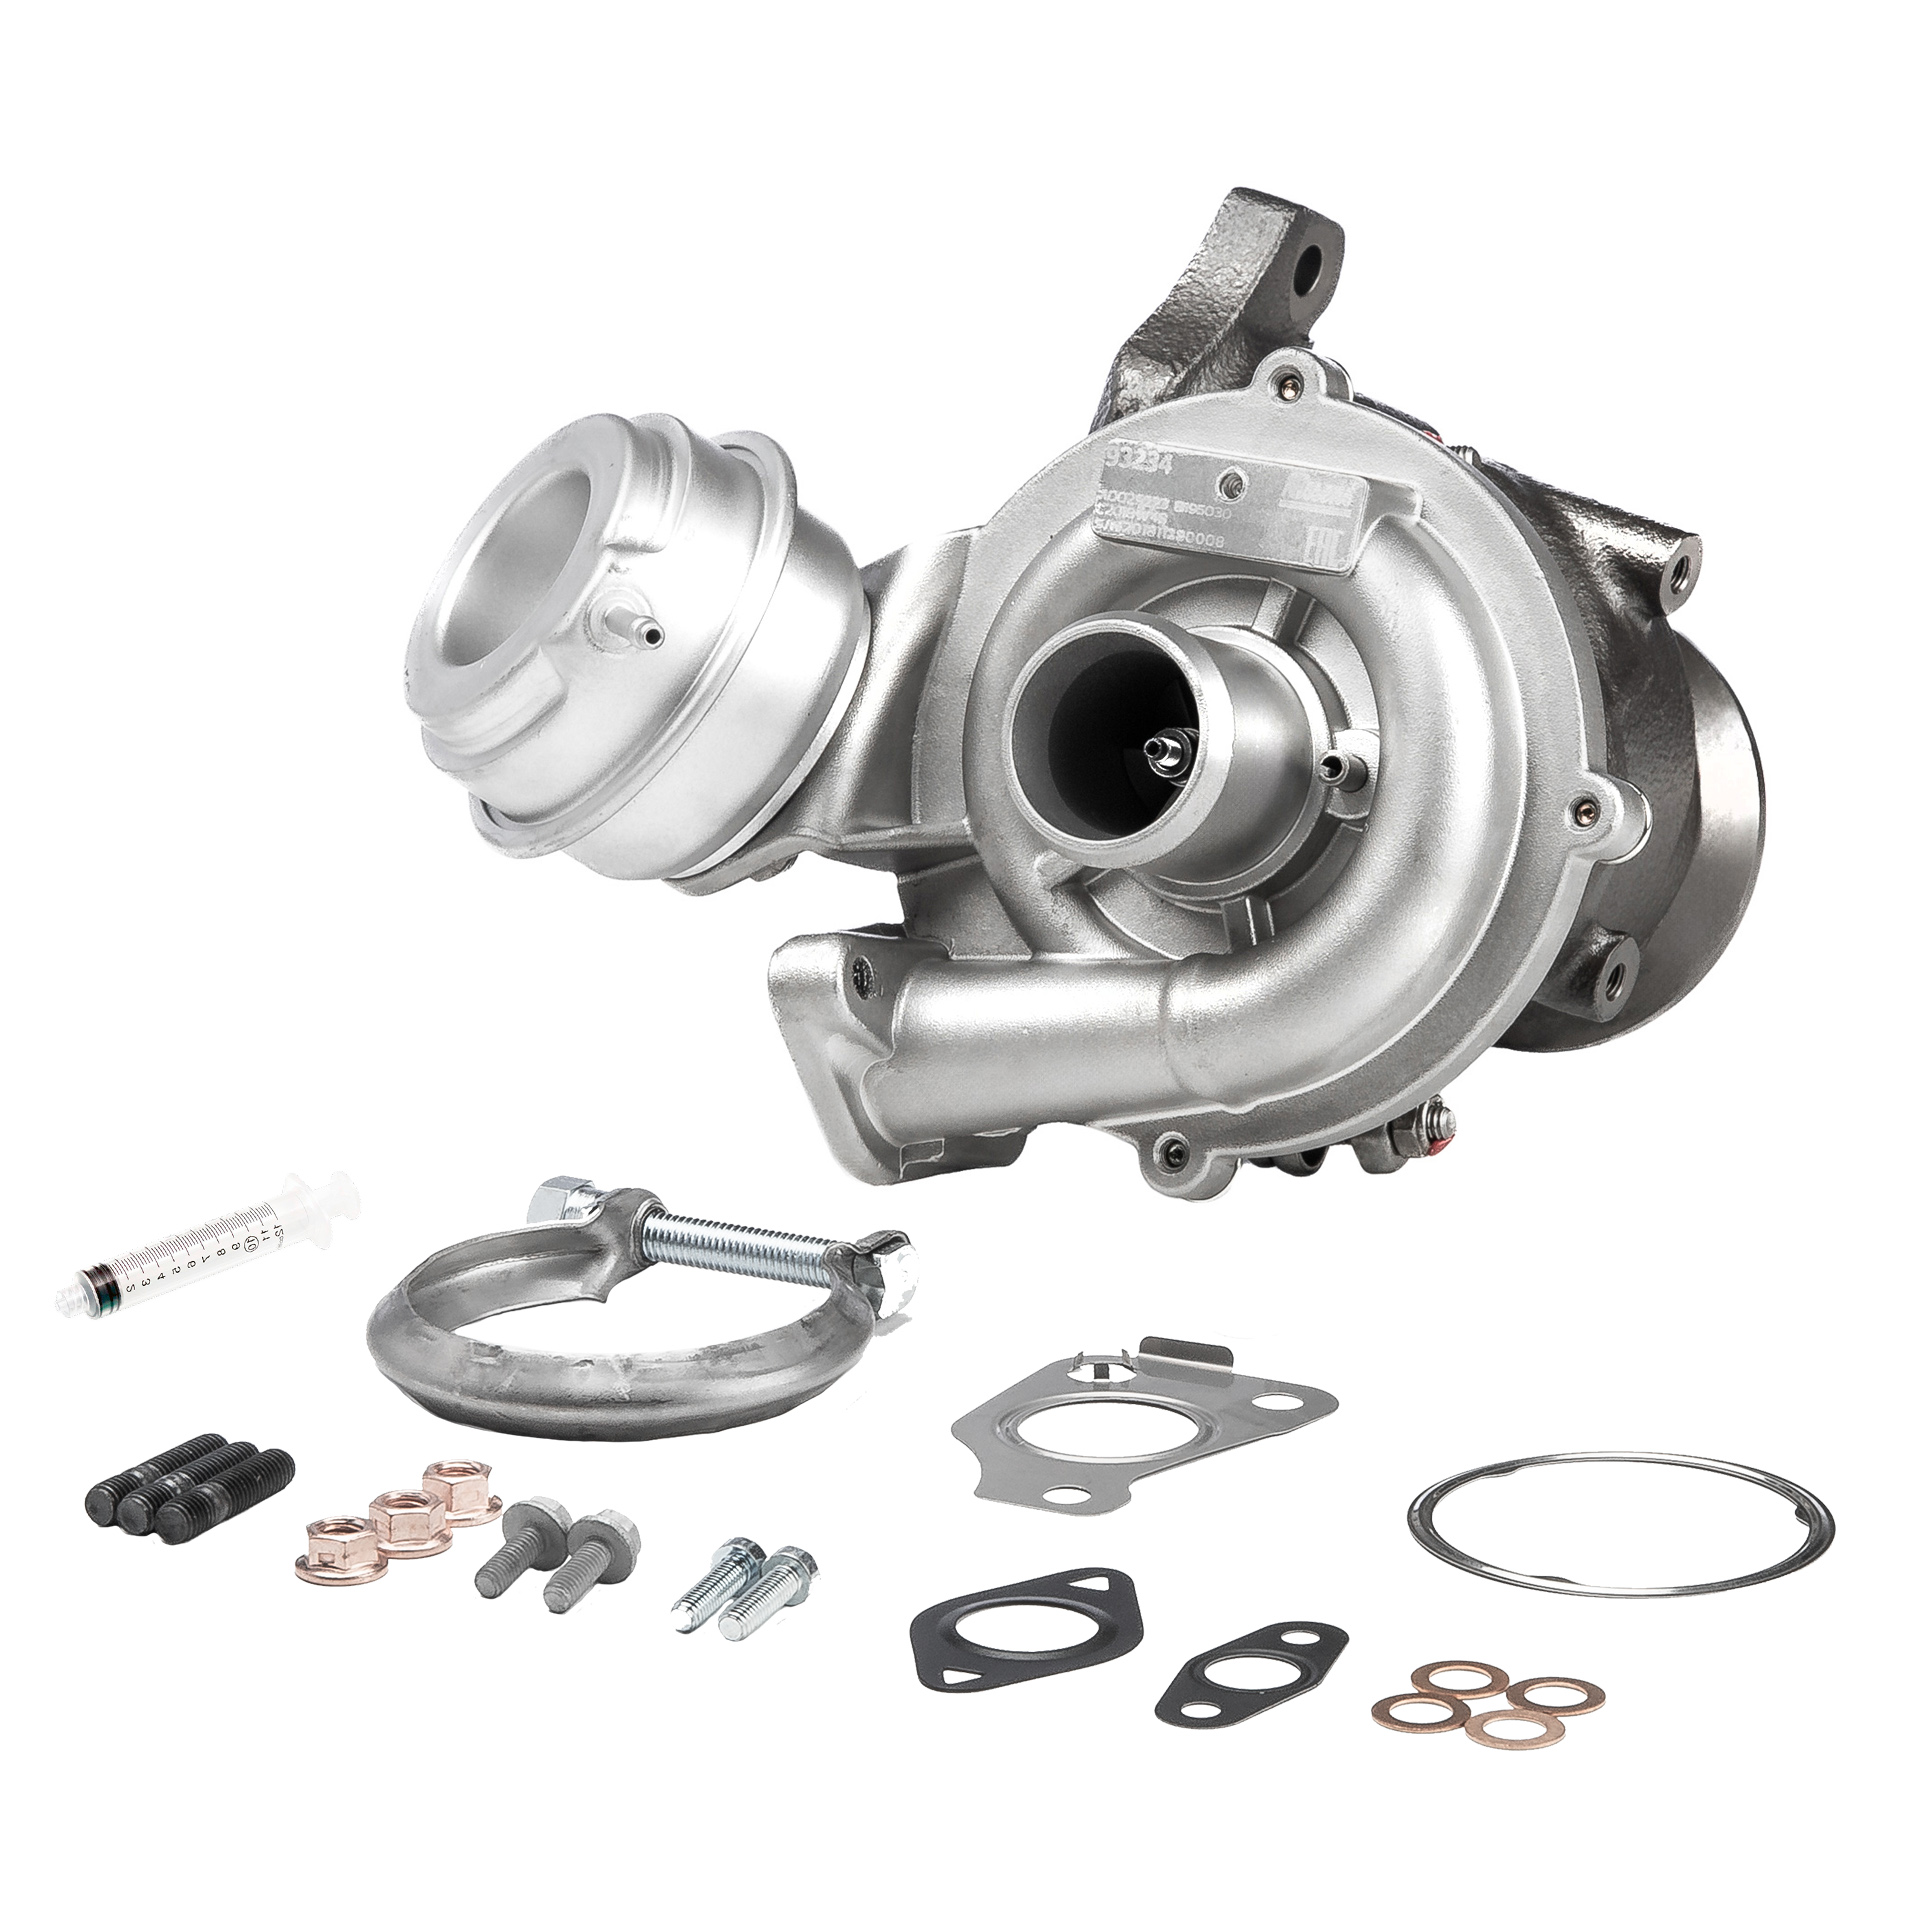 BR Turbo Turbo, with attachment material Turbo 799171-5001RSM buy